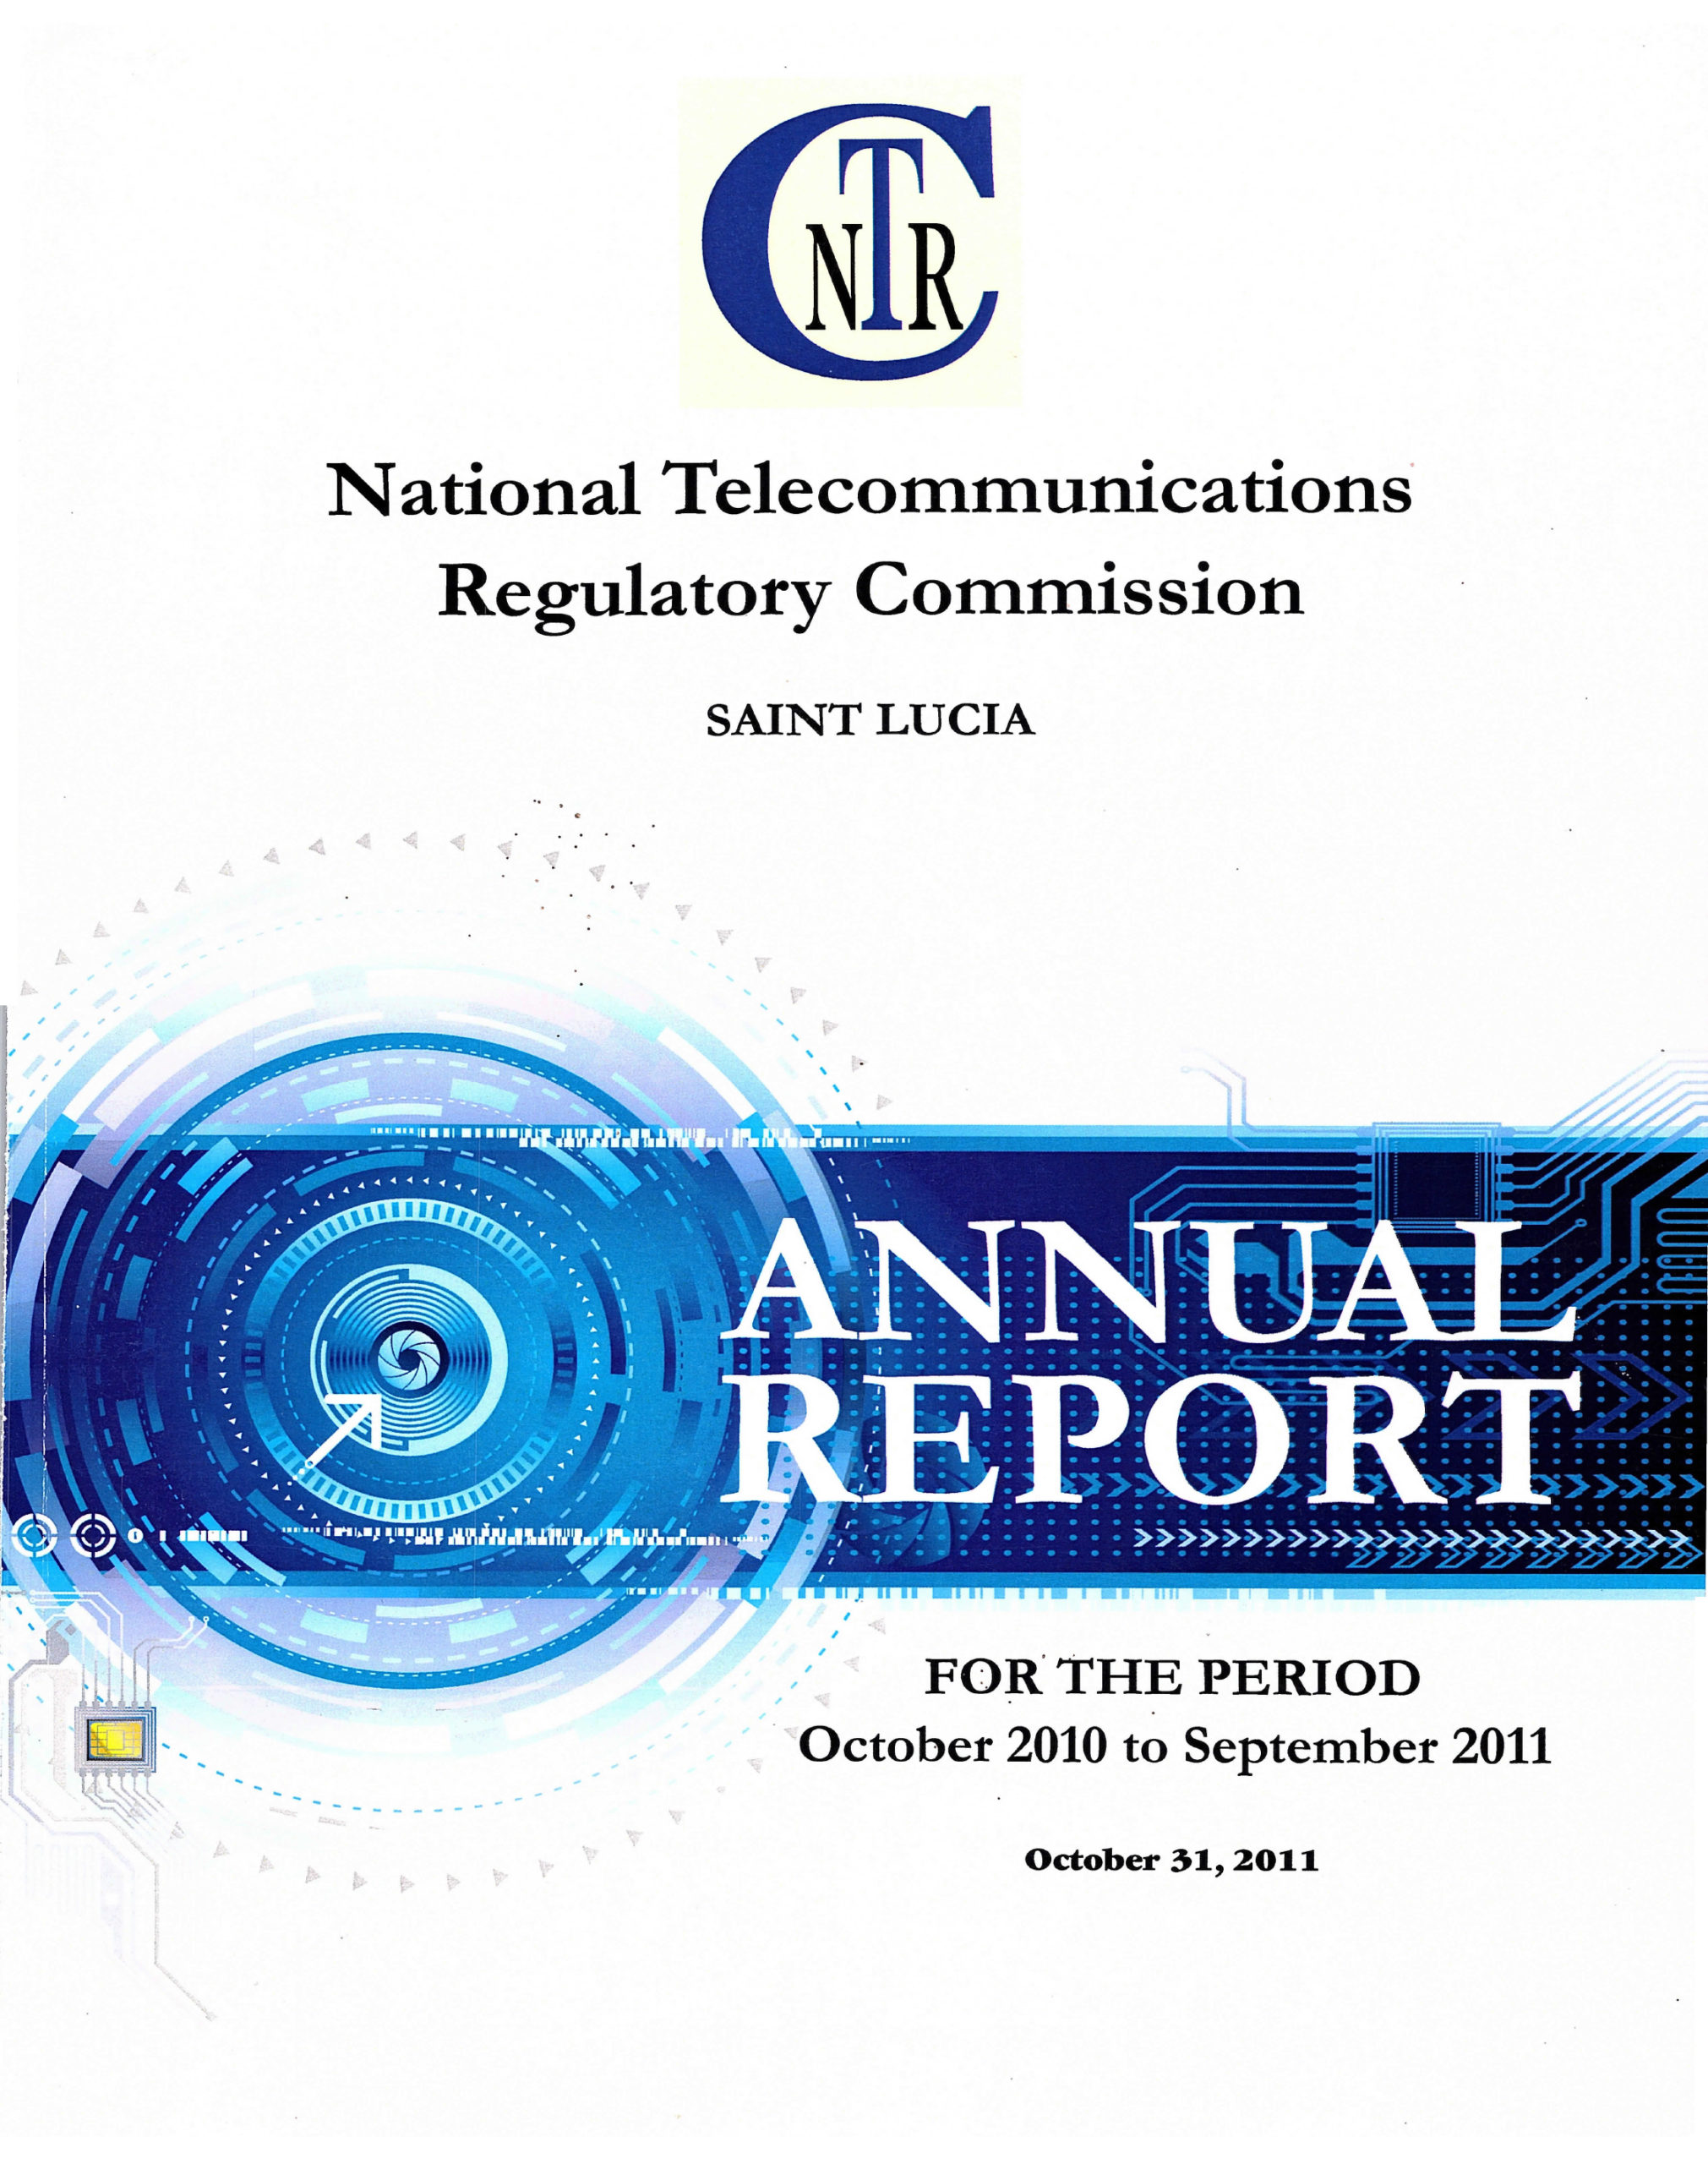 Annual Report Period October 2010 to September 2011